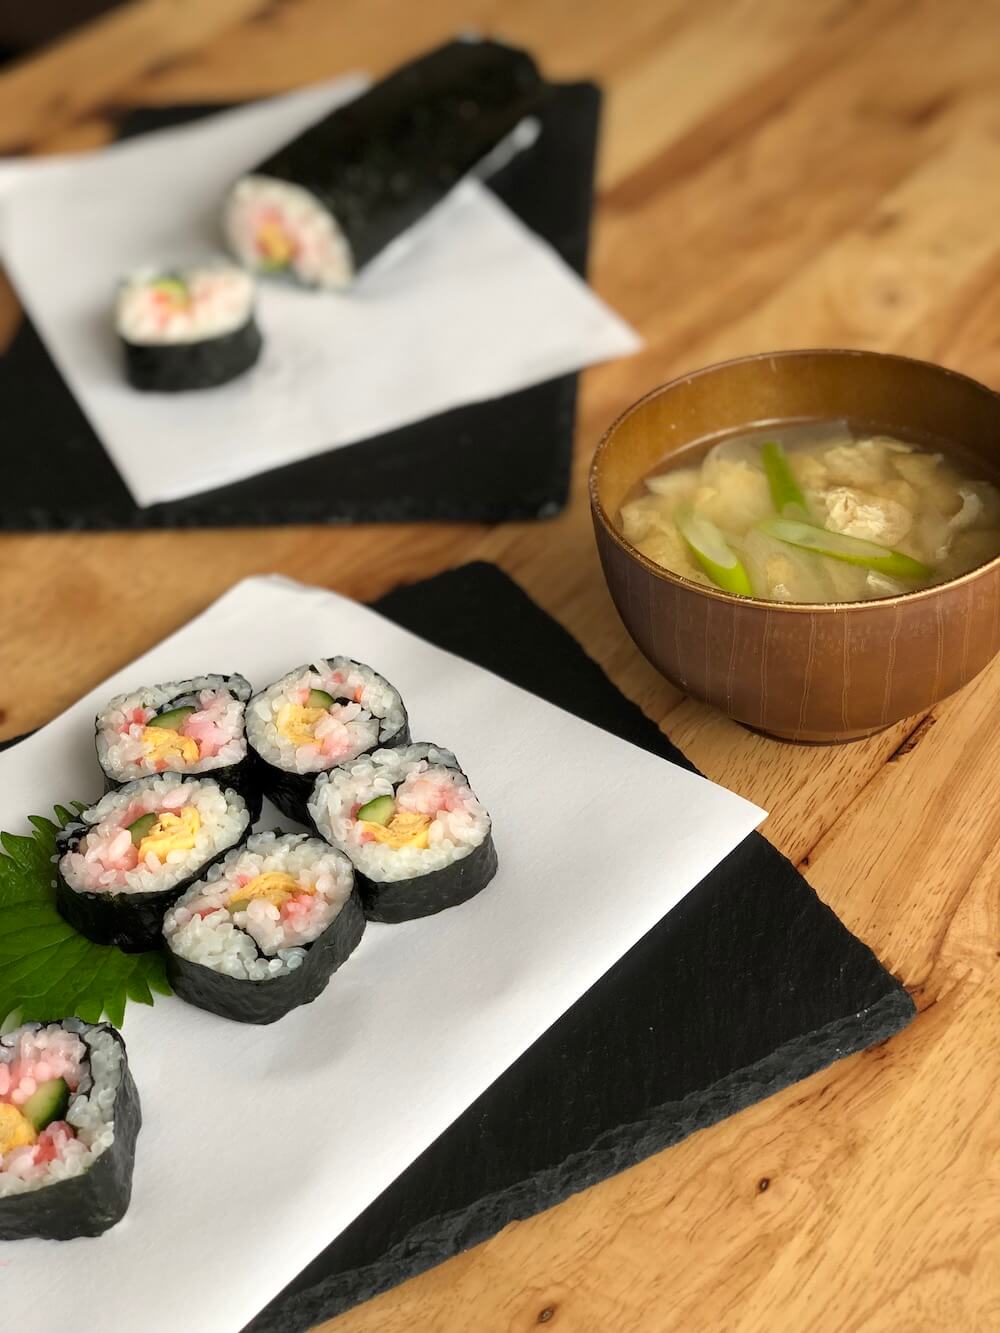 Roll Sushi & Miso Soup Cooking Class! With gift chopsticks!